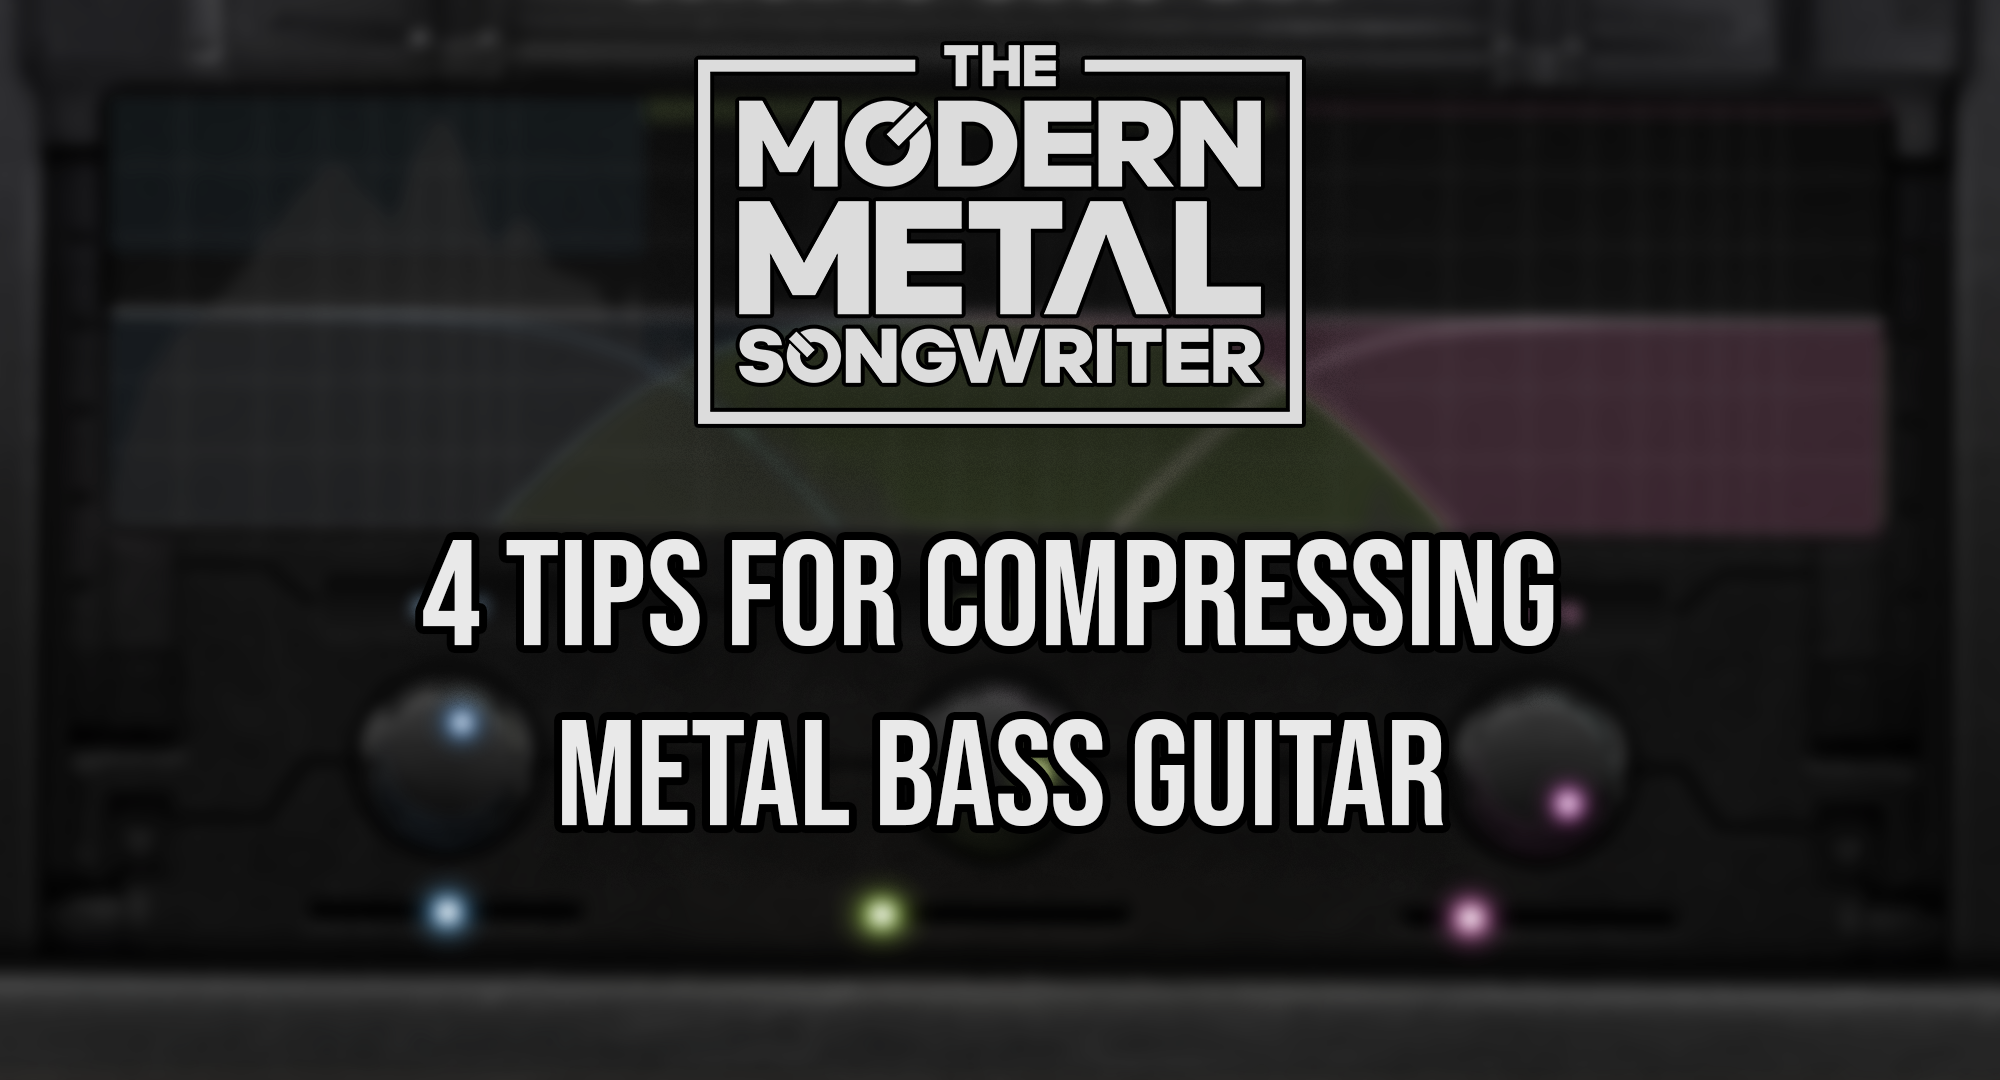 4-Tips-for-Compressing-Metal-Bass-Guitar ModernMetalSongwriter graphic